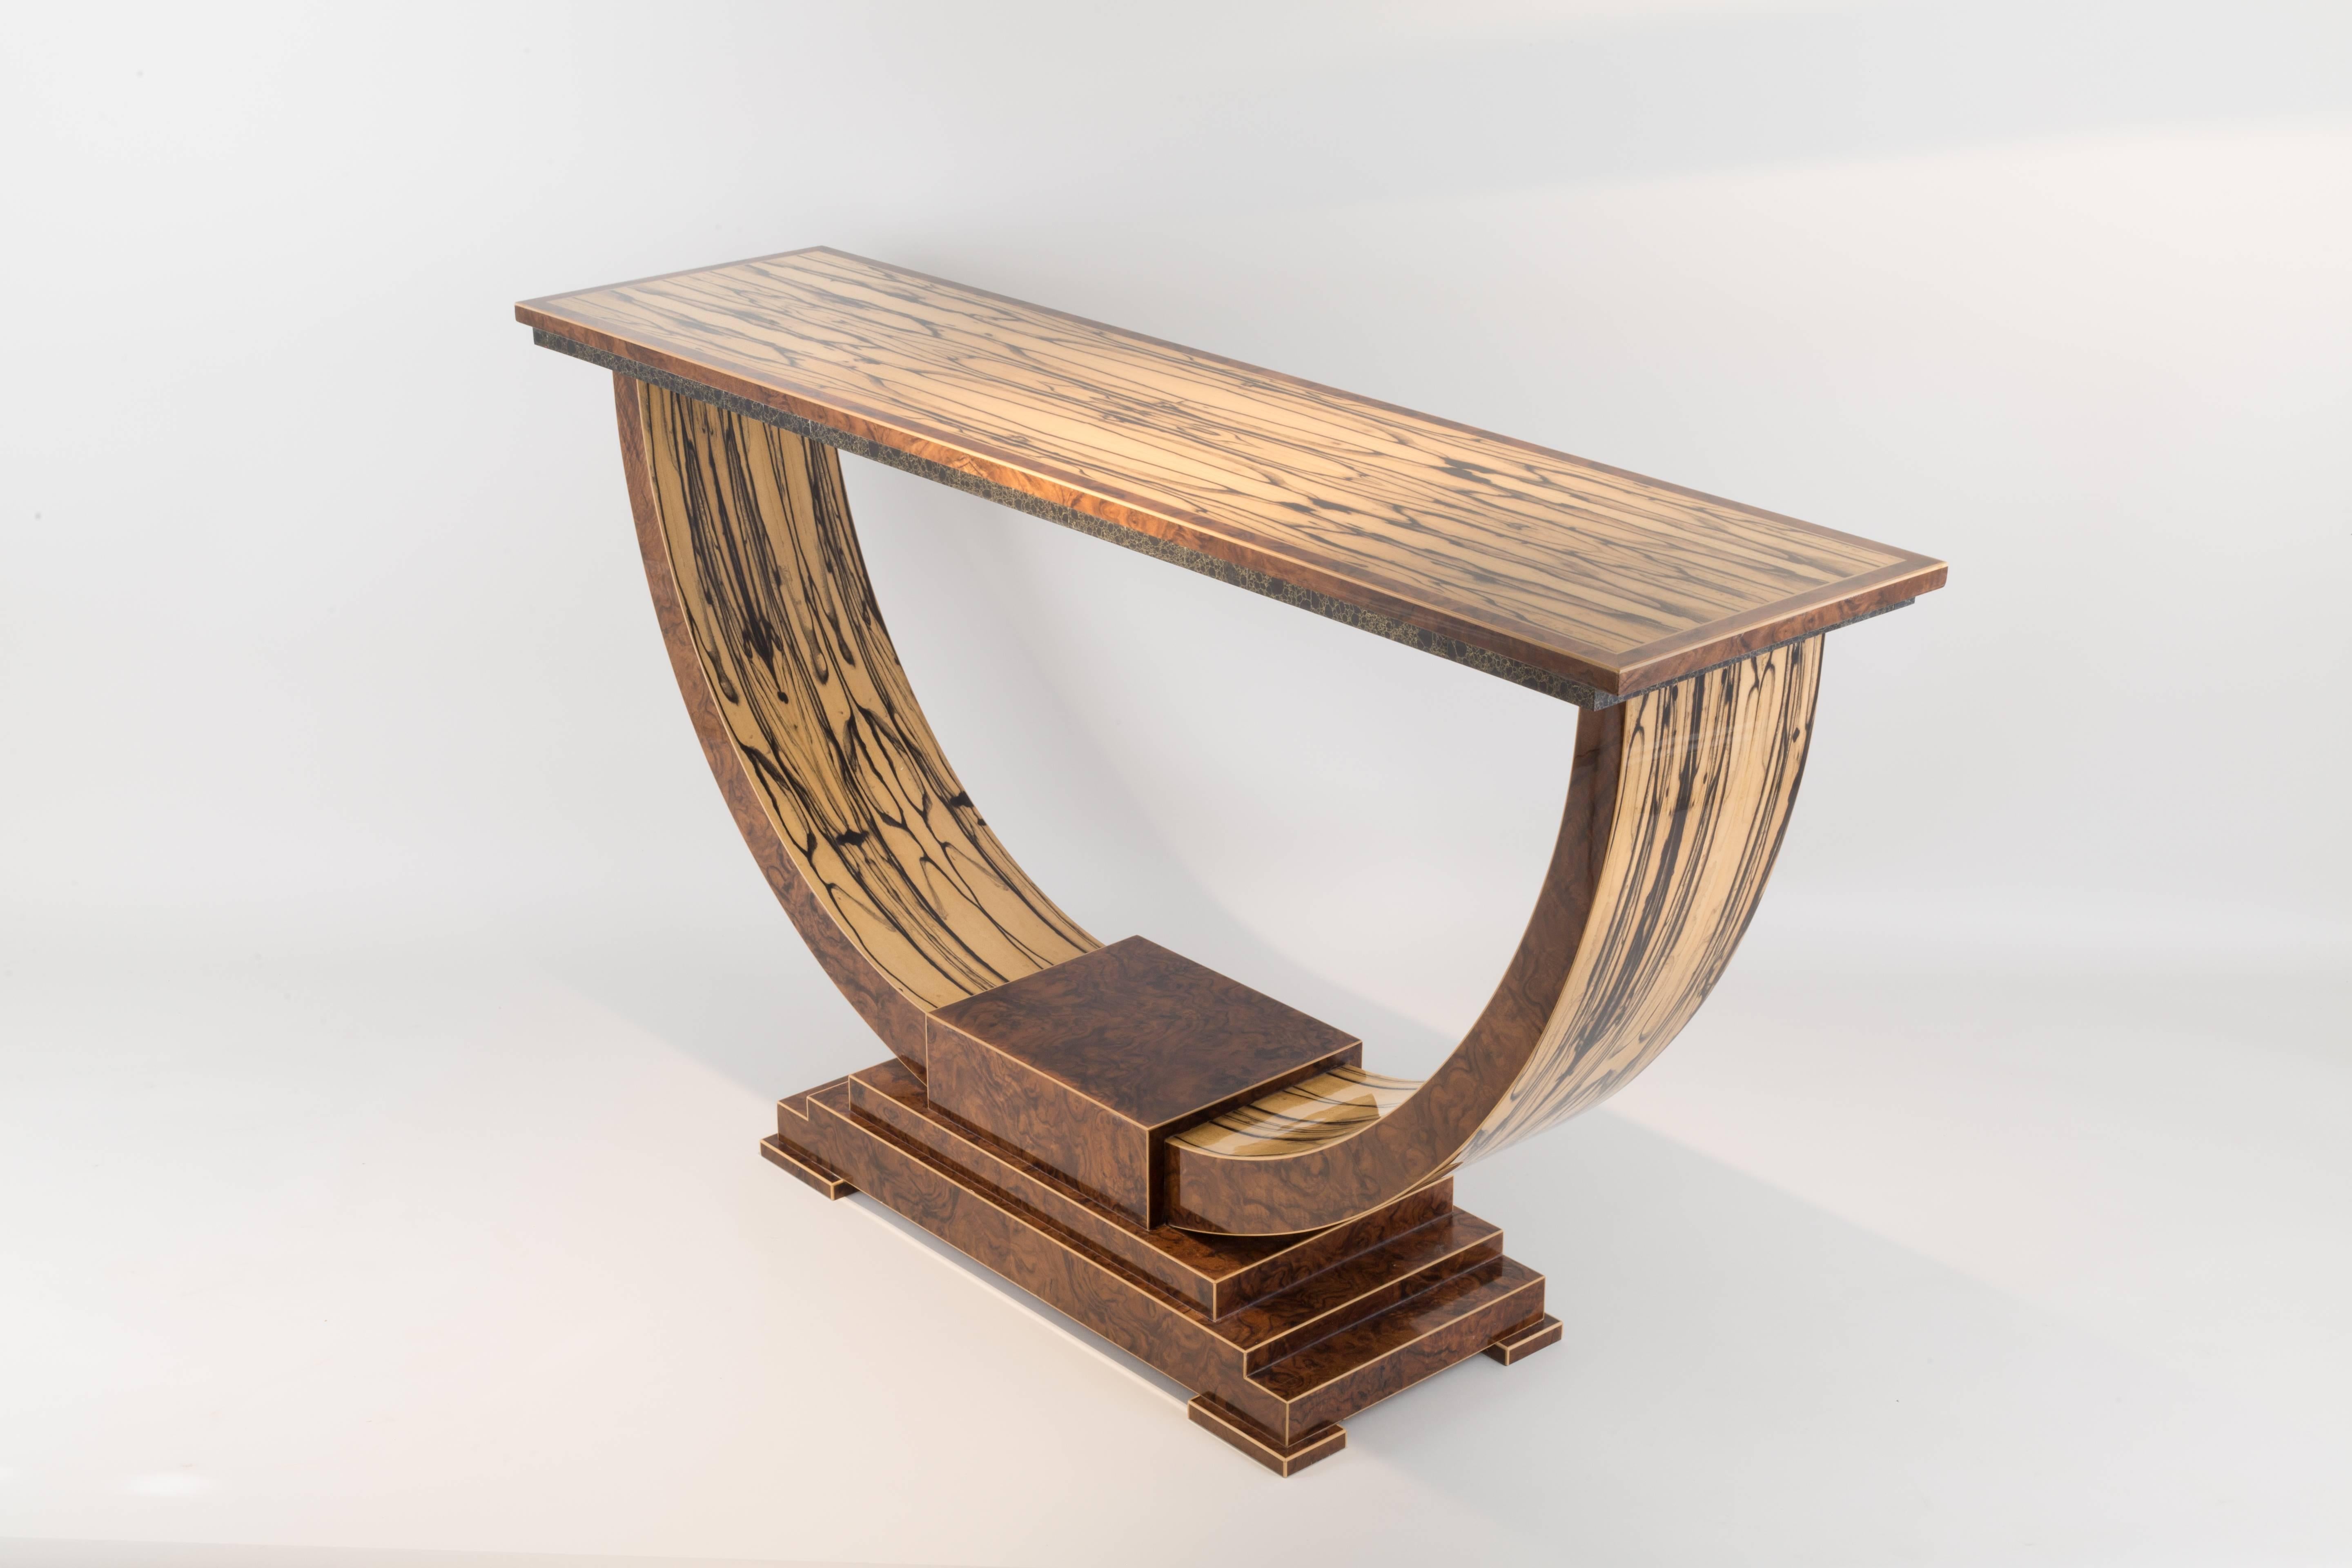 A rare and exquisite veneer, white ebony is used extensively throughout. Beautifully figured, it is paired with fine English walnut. The stone edging incorporating gold thread is produced especially for this table completing this refined console